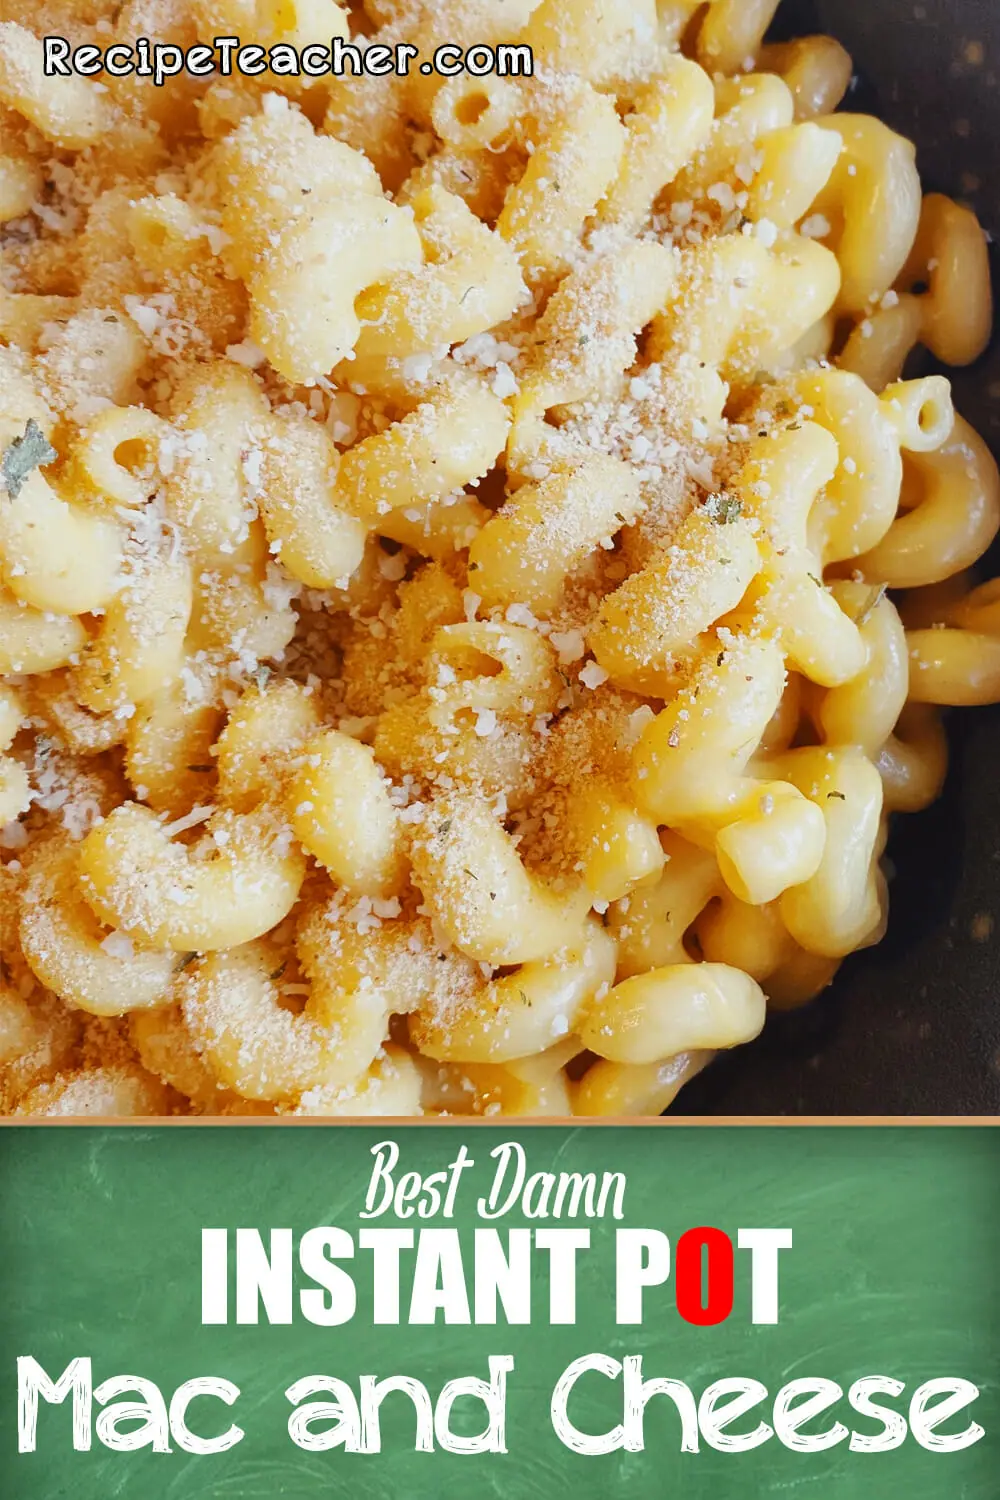 Recipe for Instant Pot mac and cheese